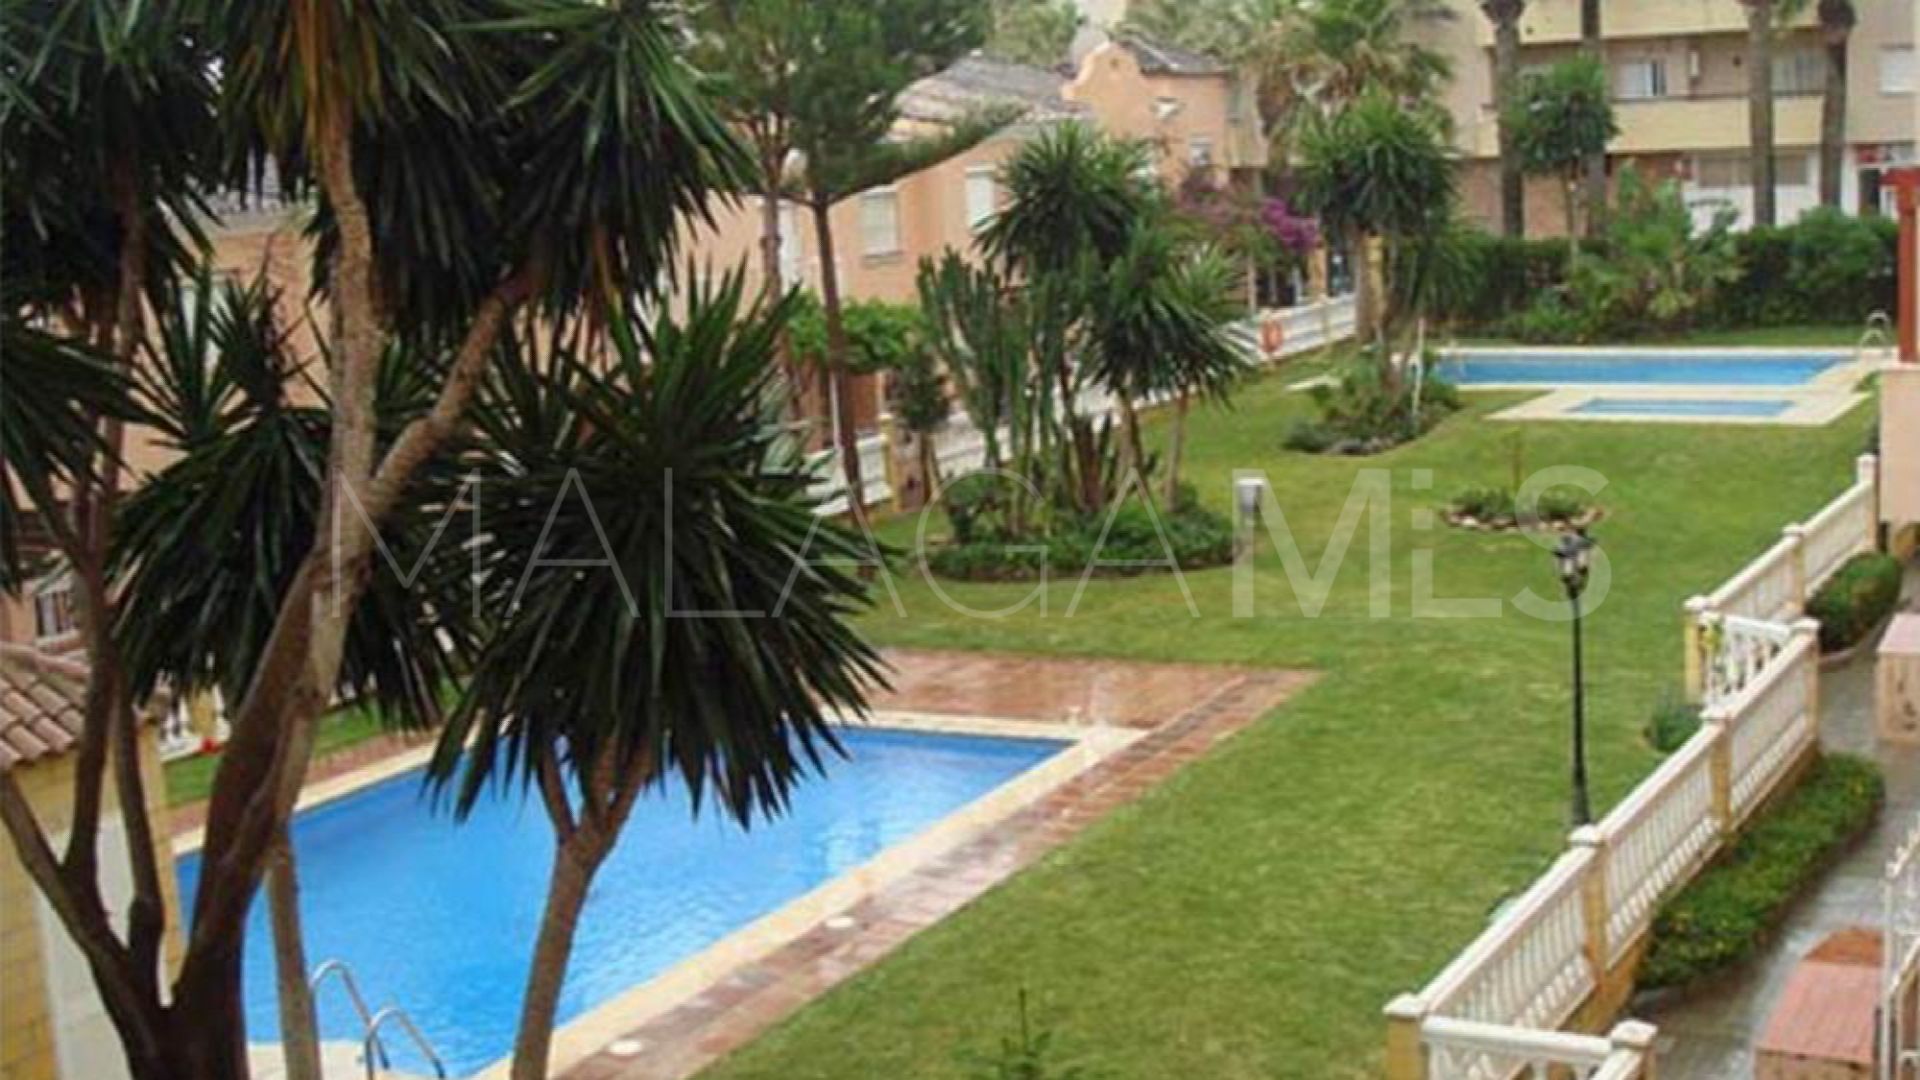 Duplex for sale in Sabinillas with 2 bedrooms